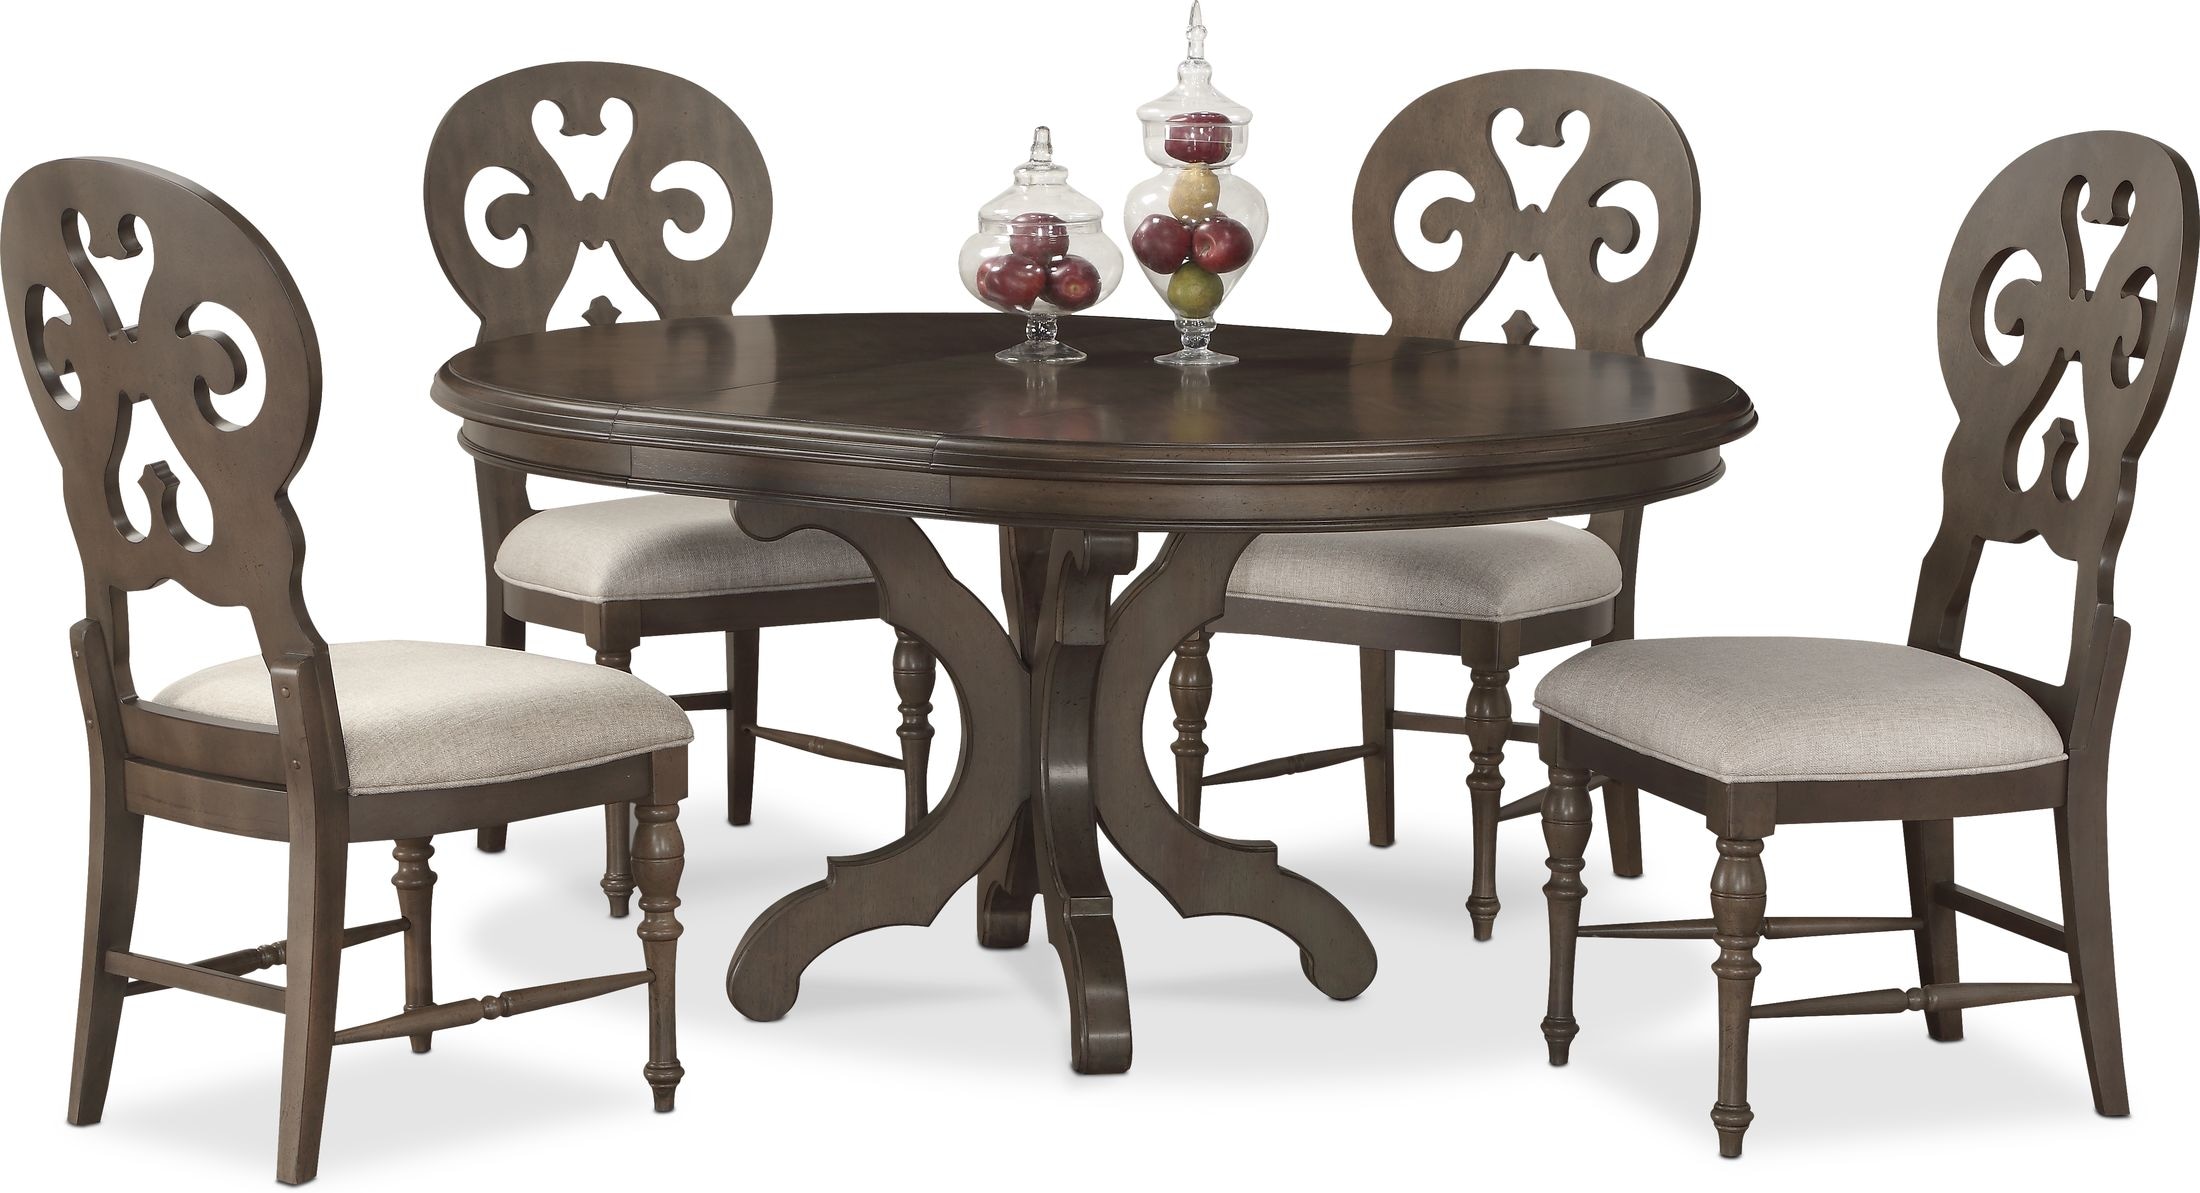 Value City Furniture Dining Chairs, Value City Furniture Dining Room Set